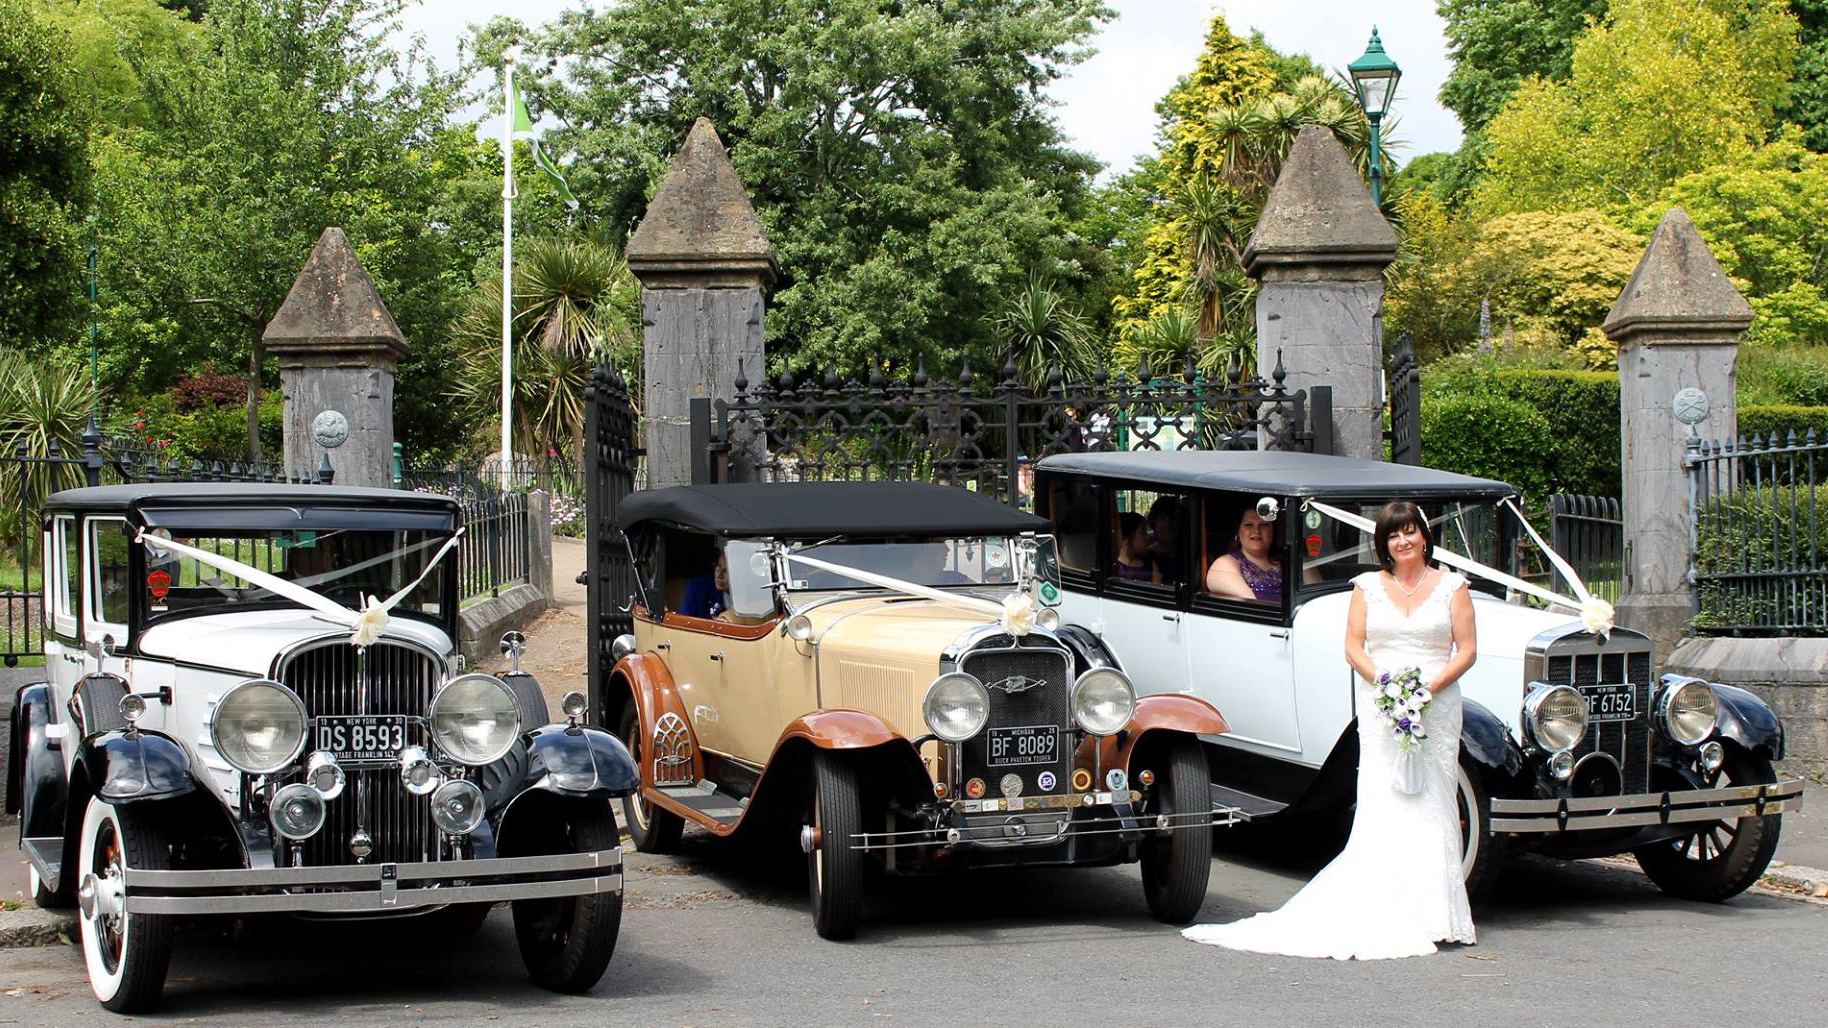 Three vintage wedding cars decorated with white ribbons at a local Exmouth wedding. All three vehicles are parked side-by-side with bride wearing a white dress holding a bridal bou